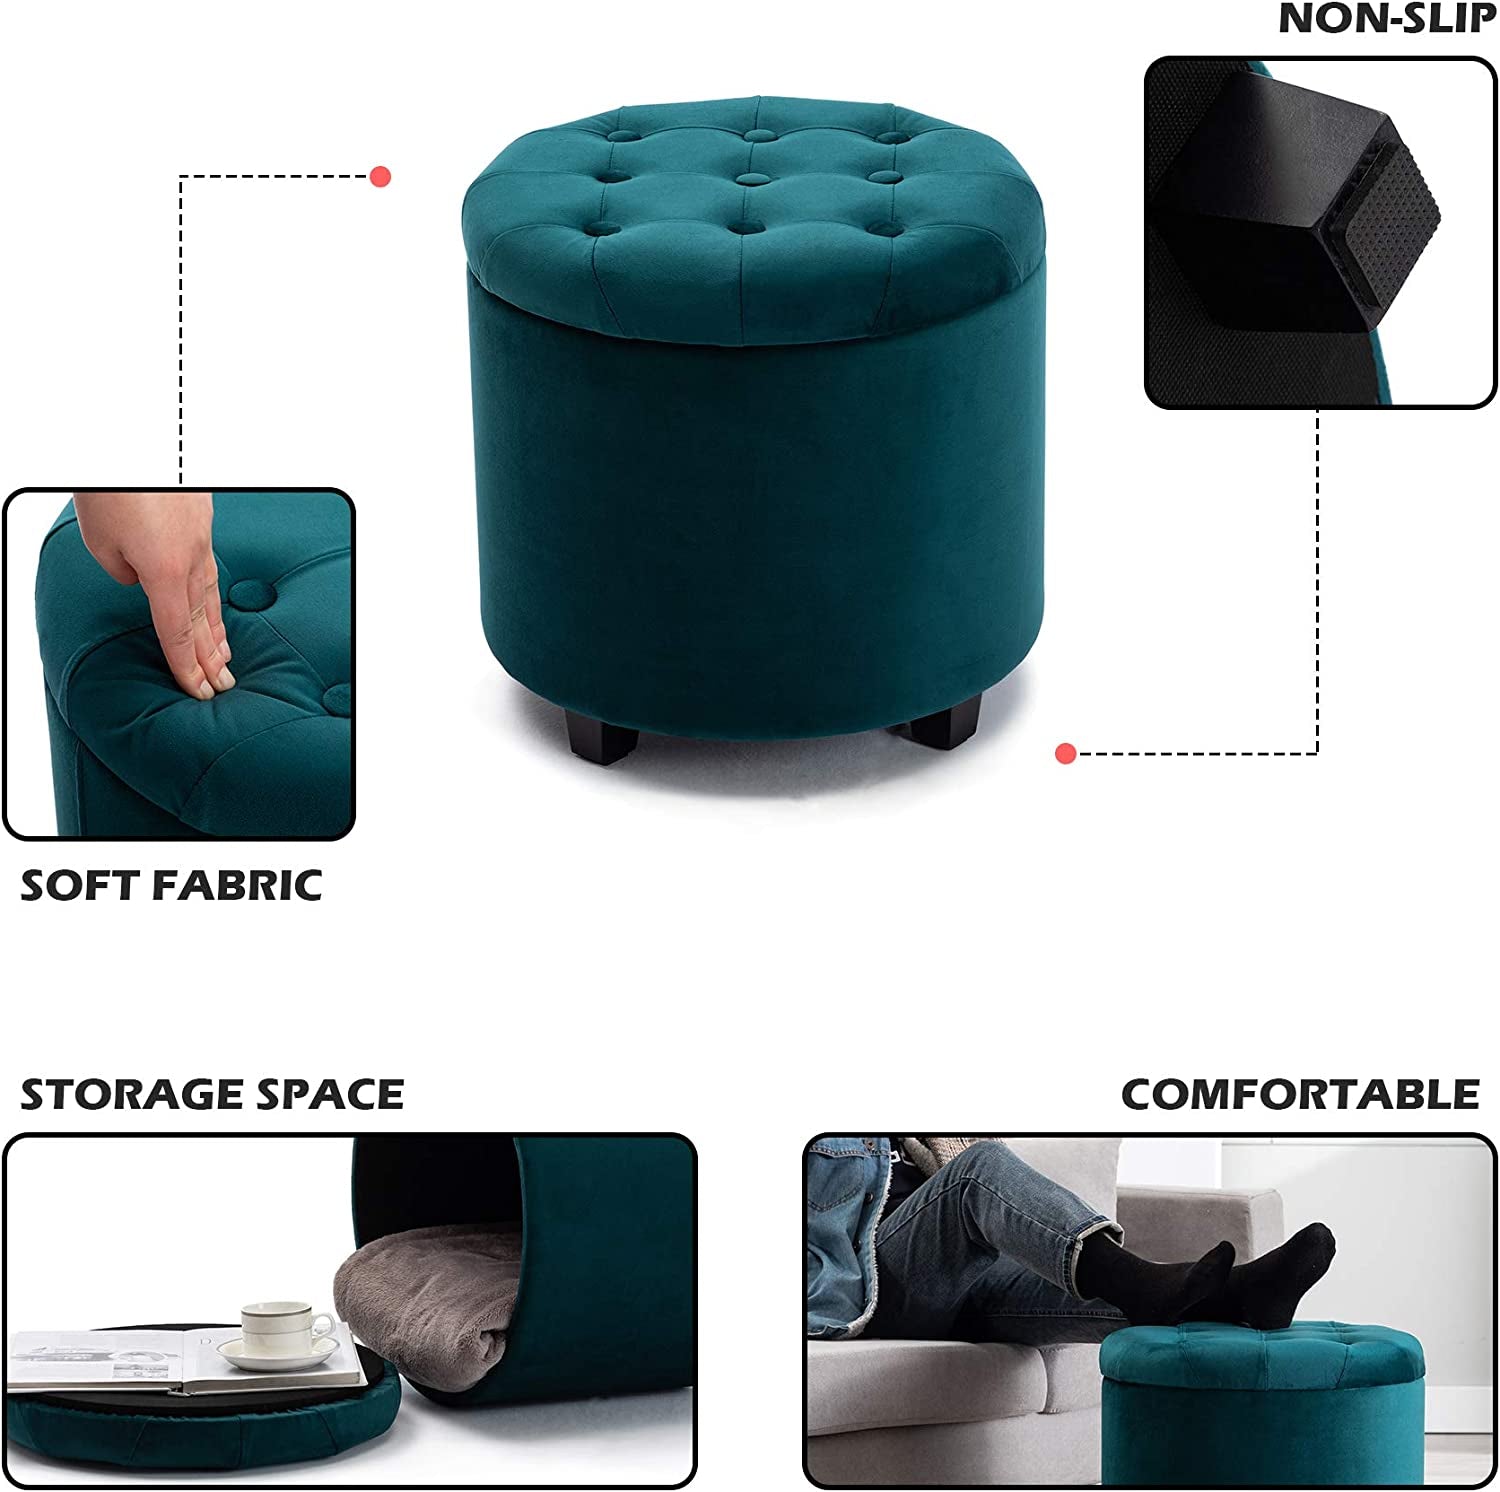 45Cm round New Velvet Padded Seat Ottoman Storage Stool Box, Footstool Pouffes Chair with Lids (Teal, Velvet)